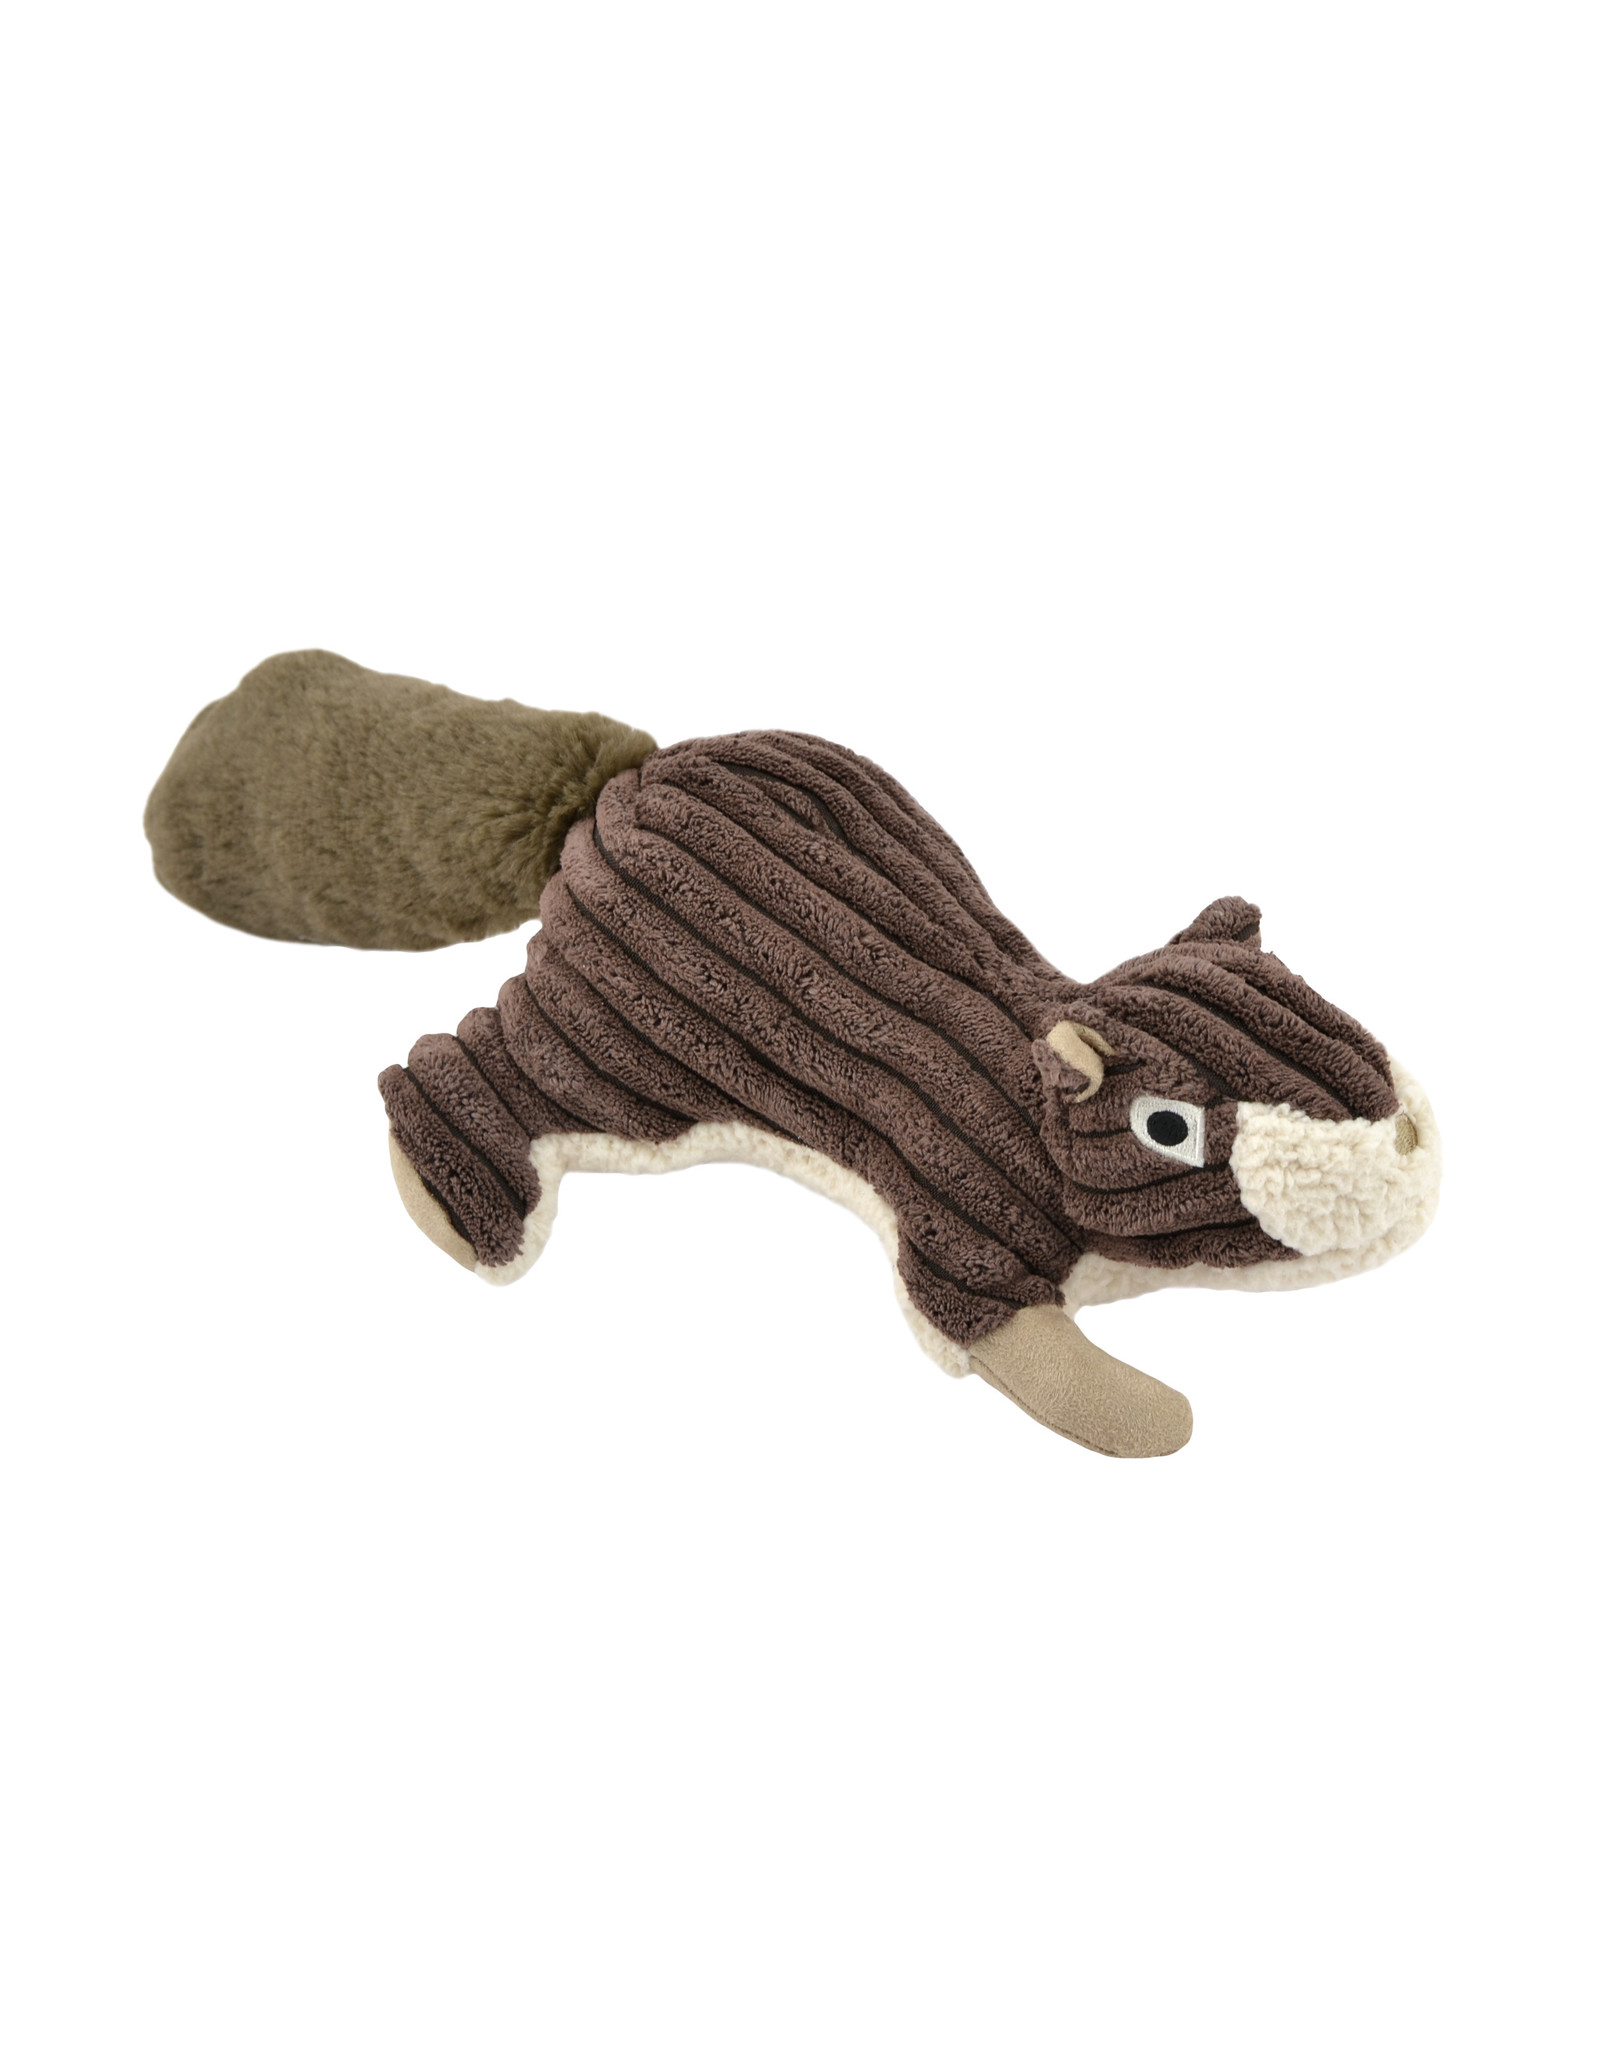 Tall Tails 12" Squirrel Toy